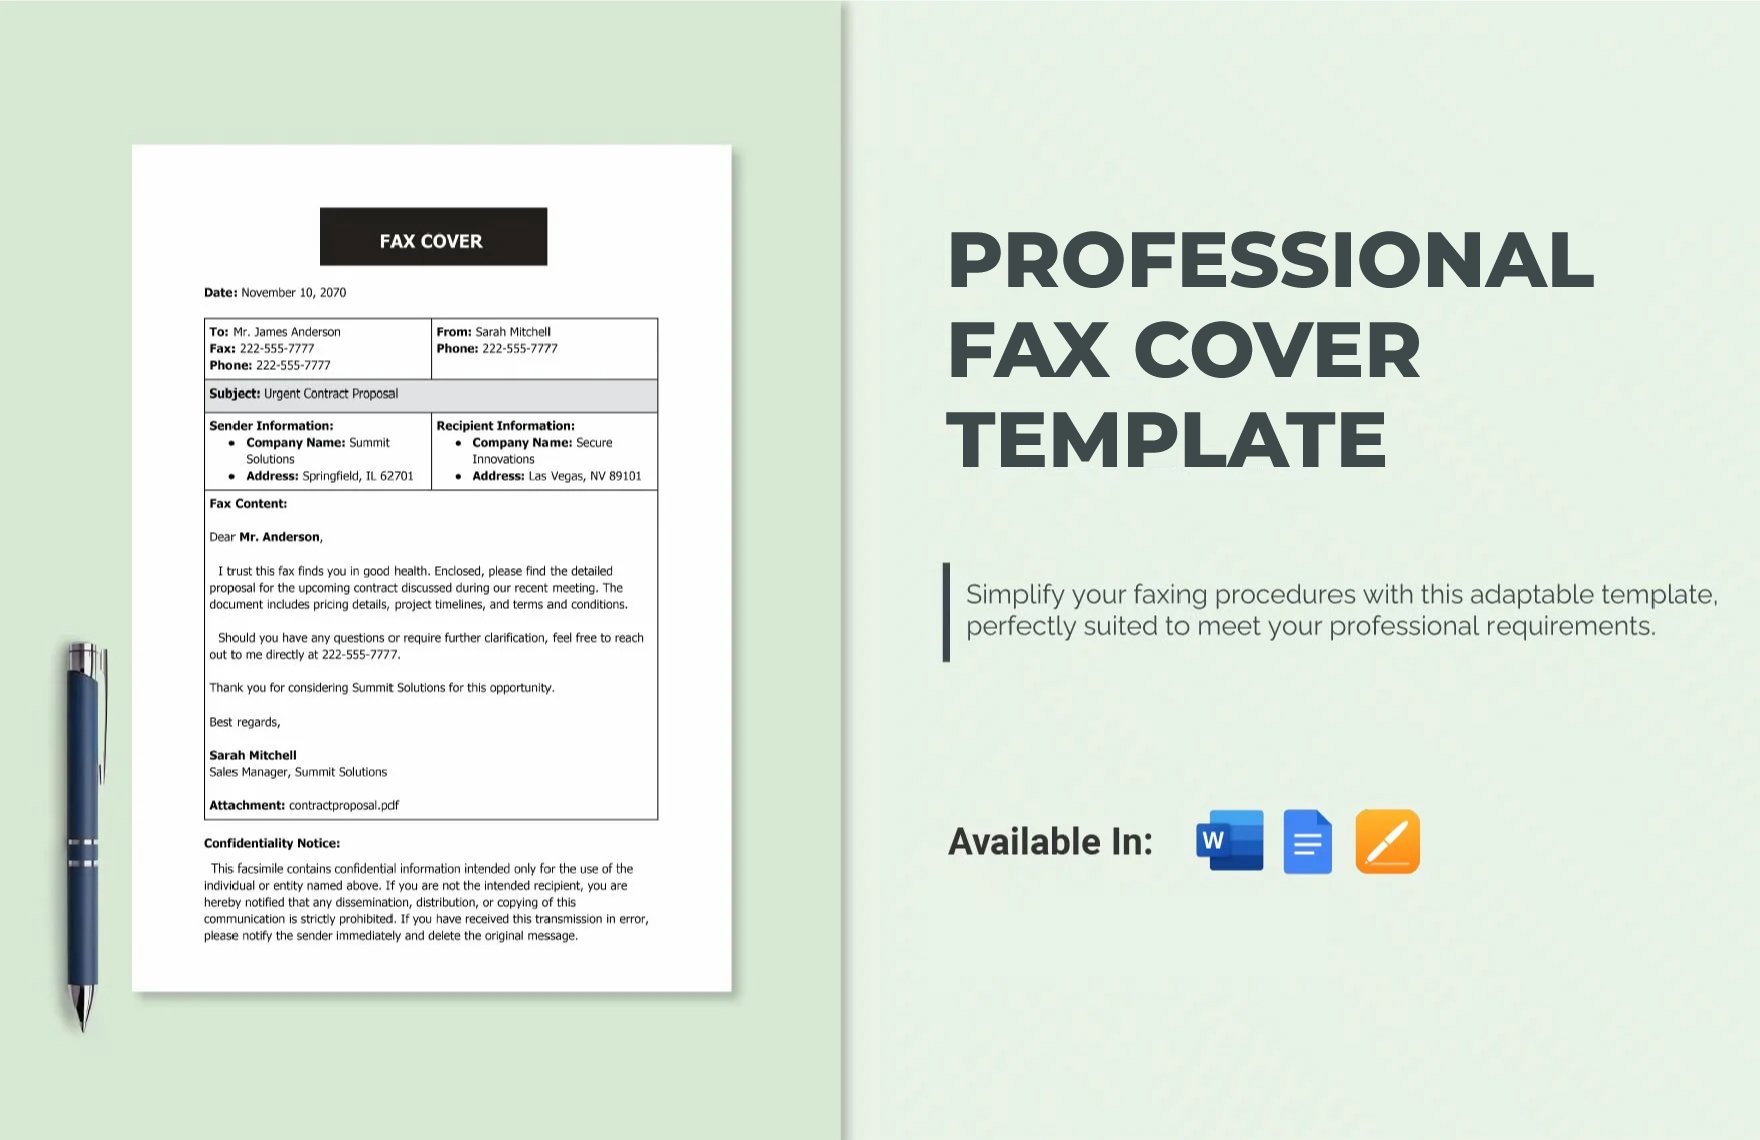 Professional Fax Cover Template in Word, Google Docs, Apple Pages